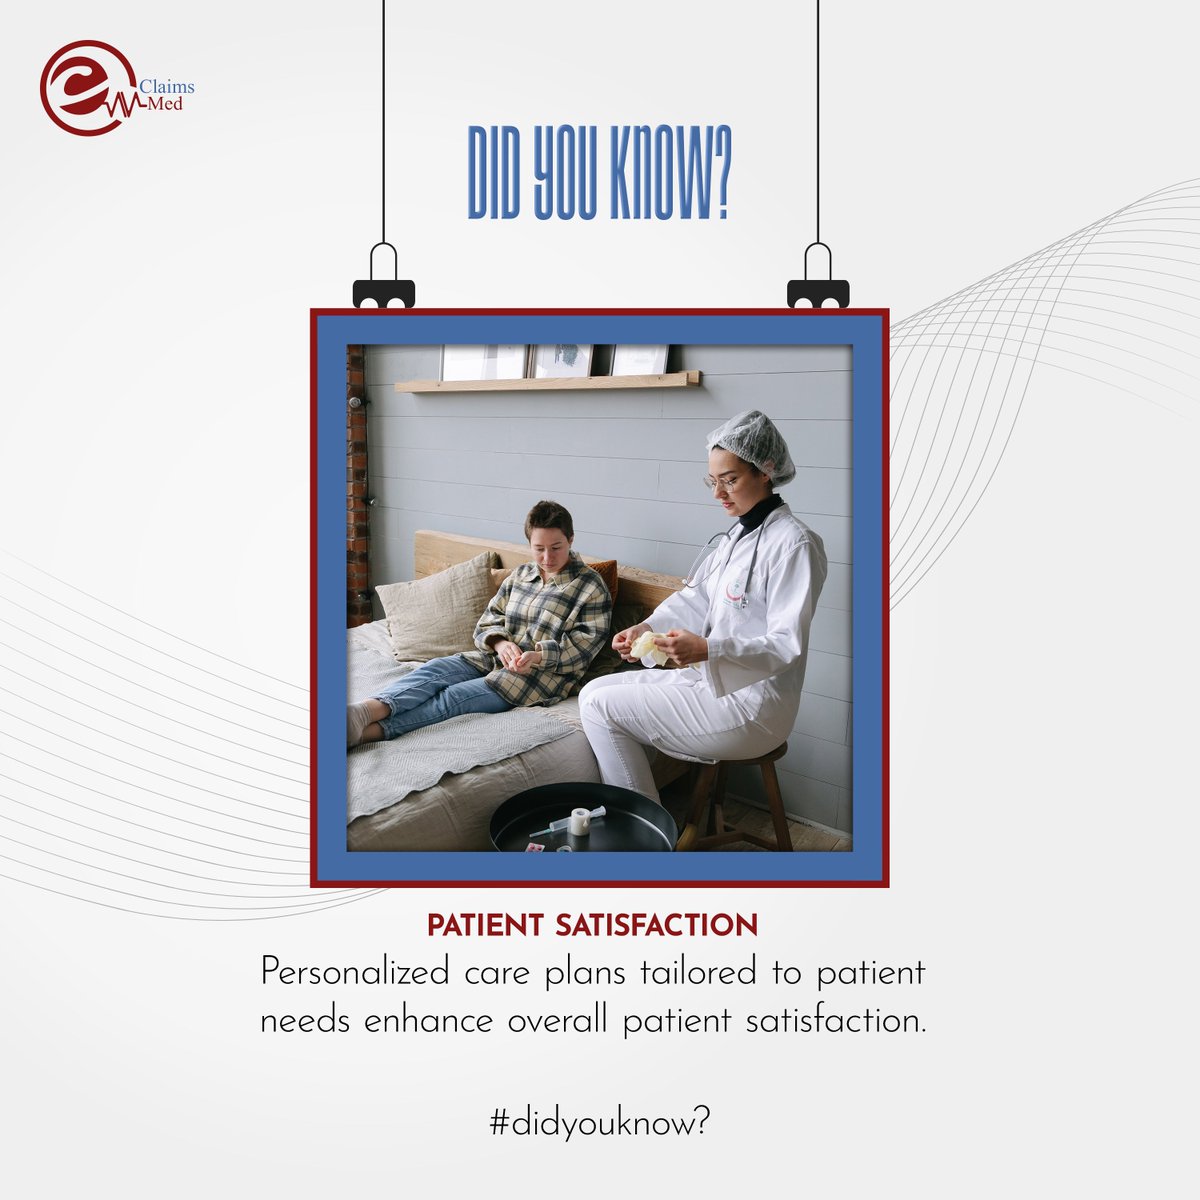 Did You Know❓

About Patient Satisfaction.

#claimsmed #healthcare #medicalbilling #providercredentialing #didyouknowfacts #didyouknowthat #DidYouKnowThis
#PatientSatisfaction #careplan #PatientSatisfaction